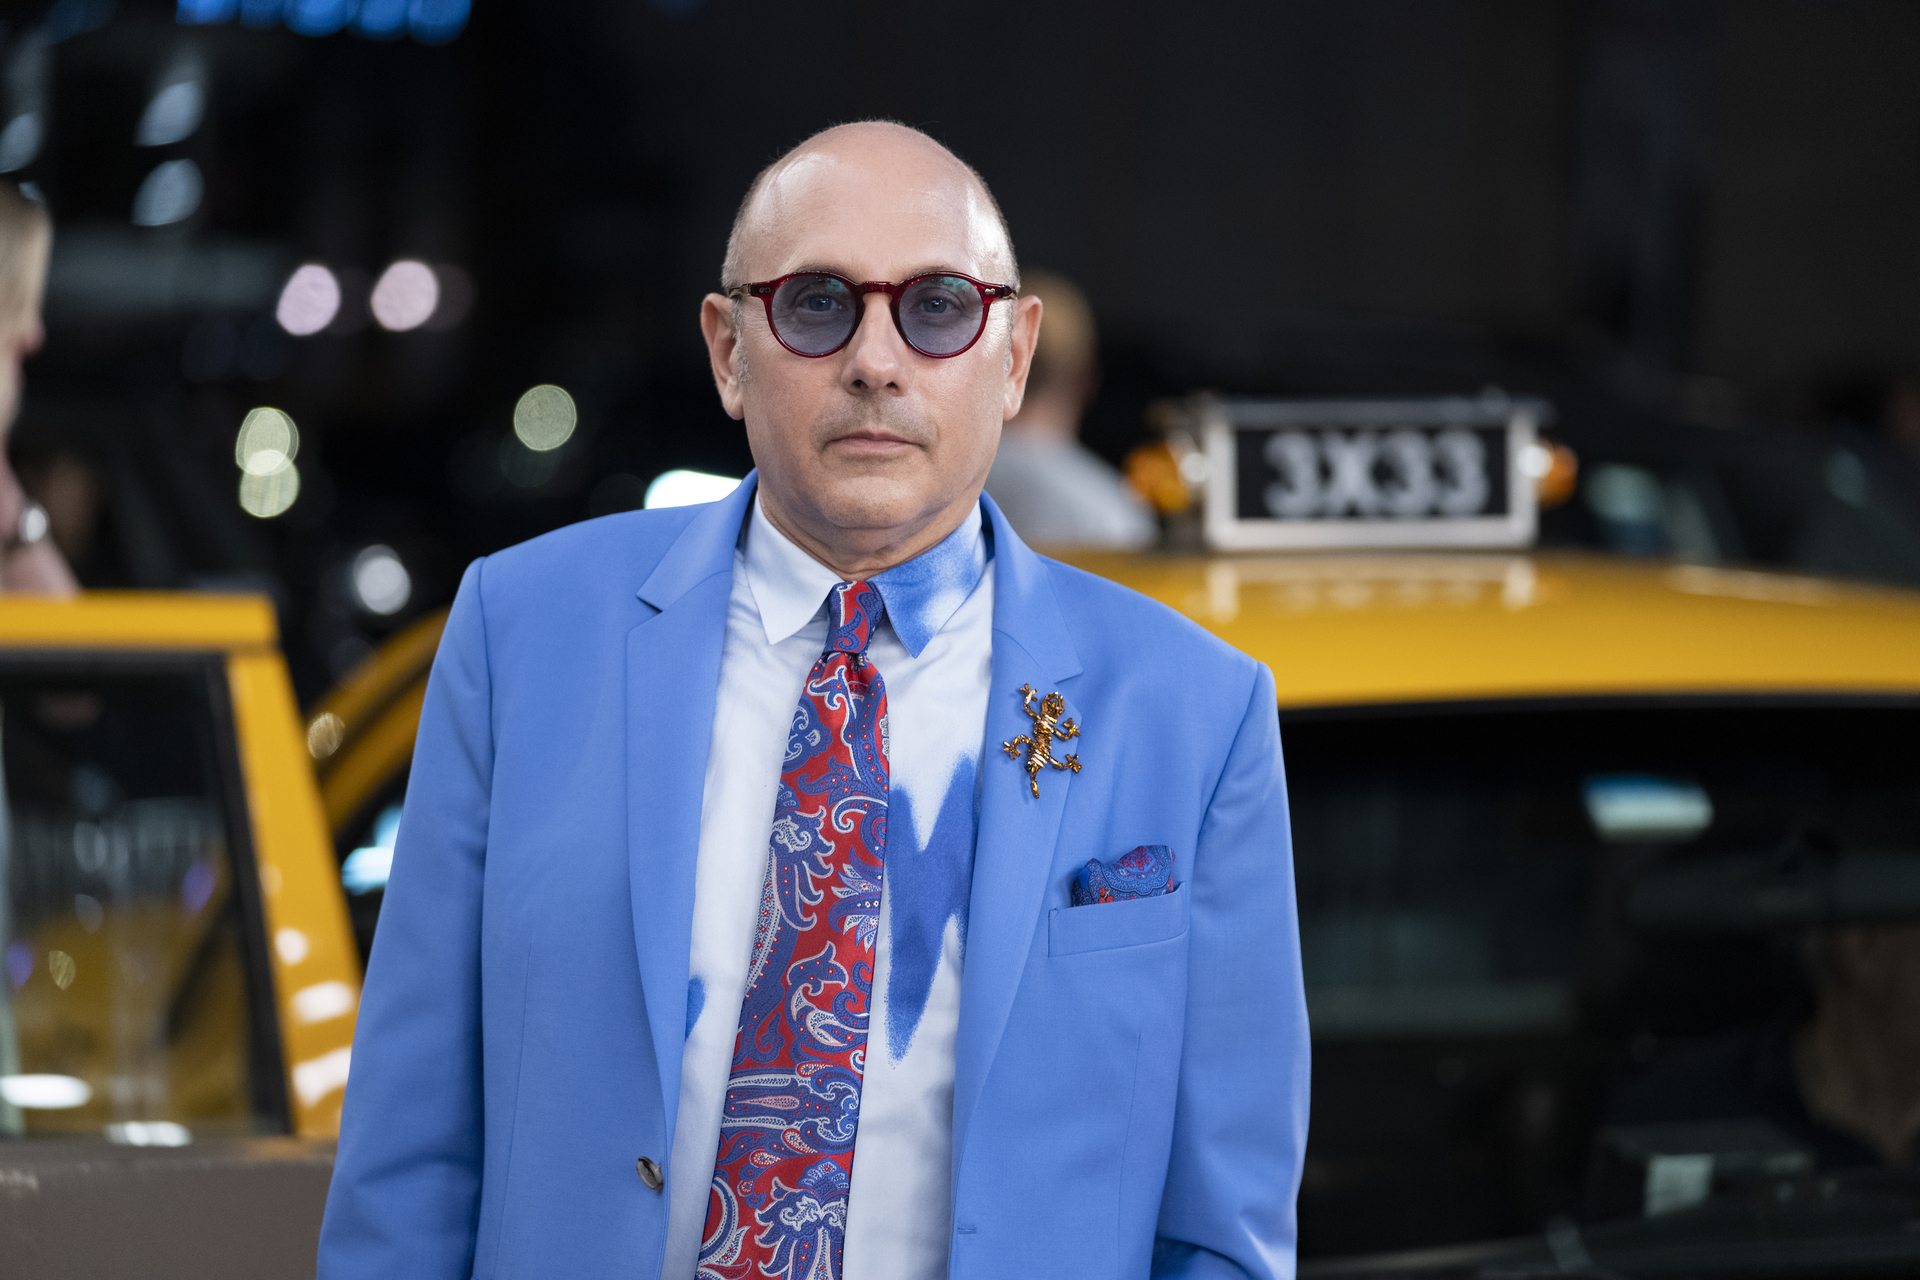 Willie Garson stands in front of a yellow tax during the filming of 'And Just Like That...'